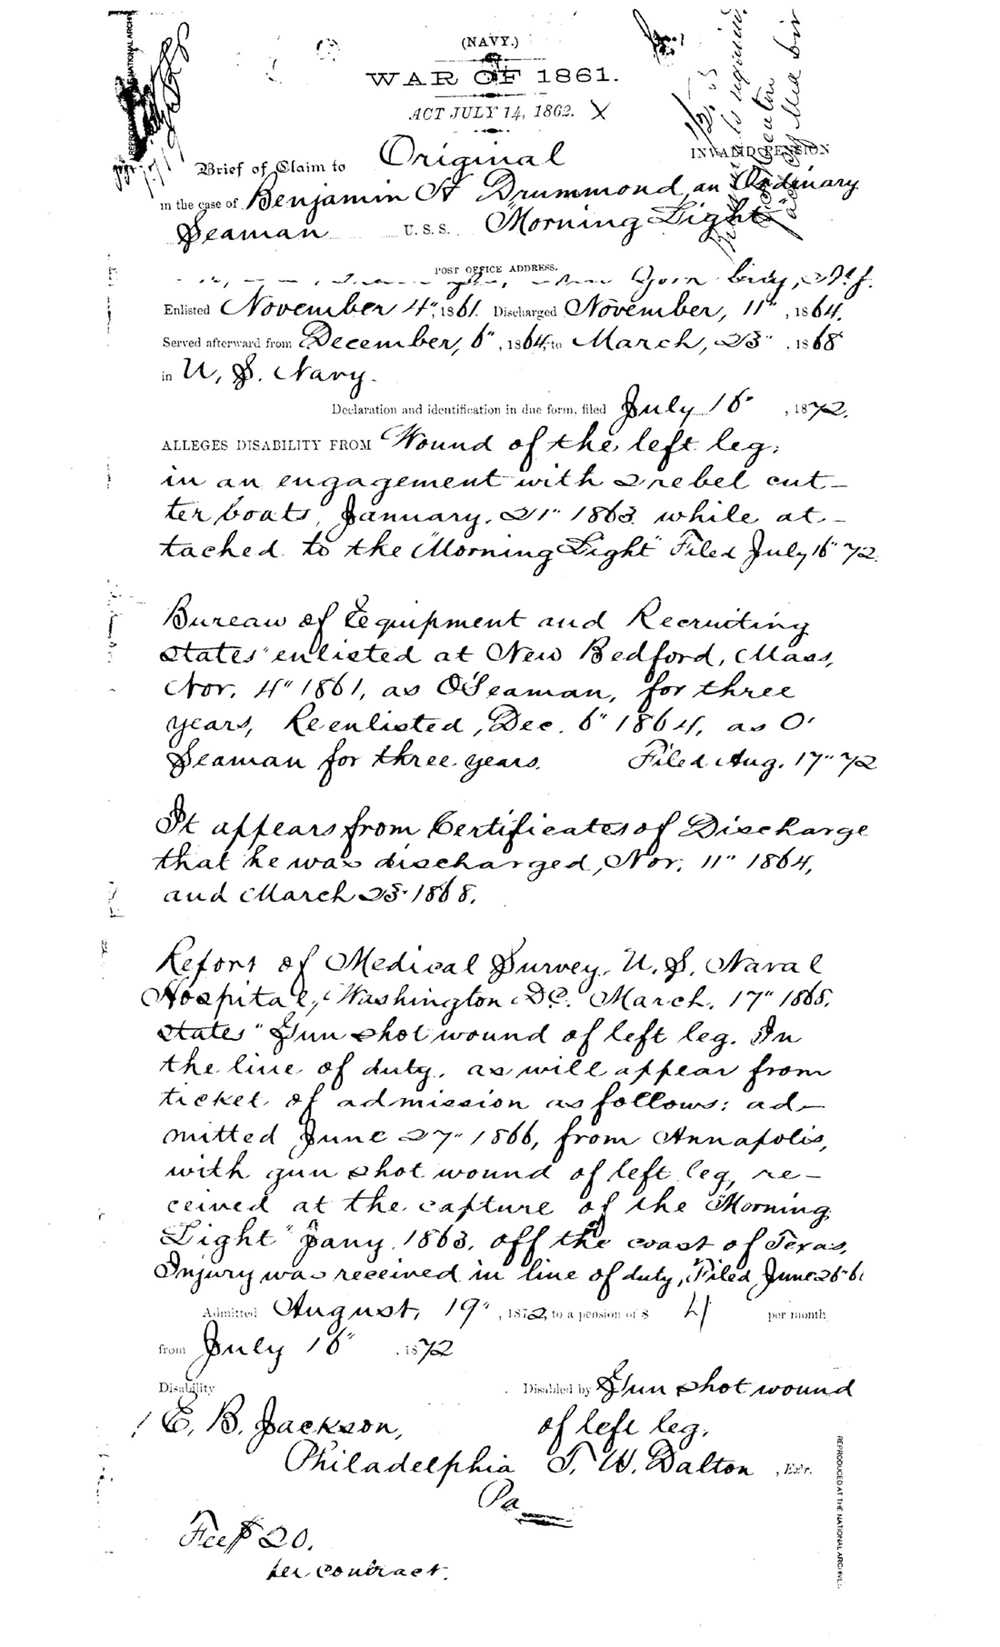 Copy of the 1872 Brief of Claim for a pension based on his wound during the WAR OF 1861